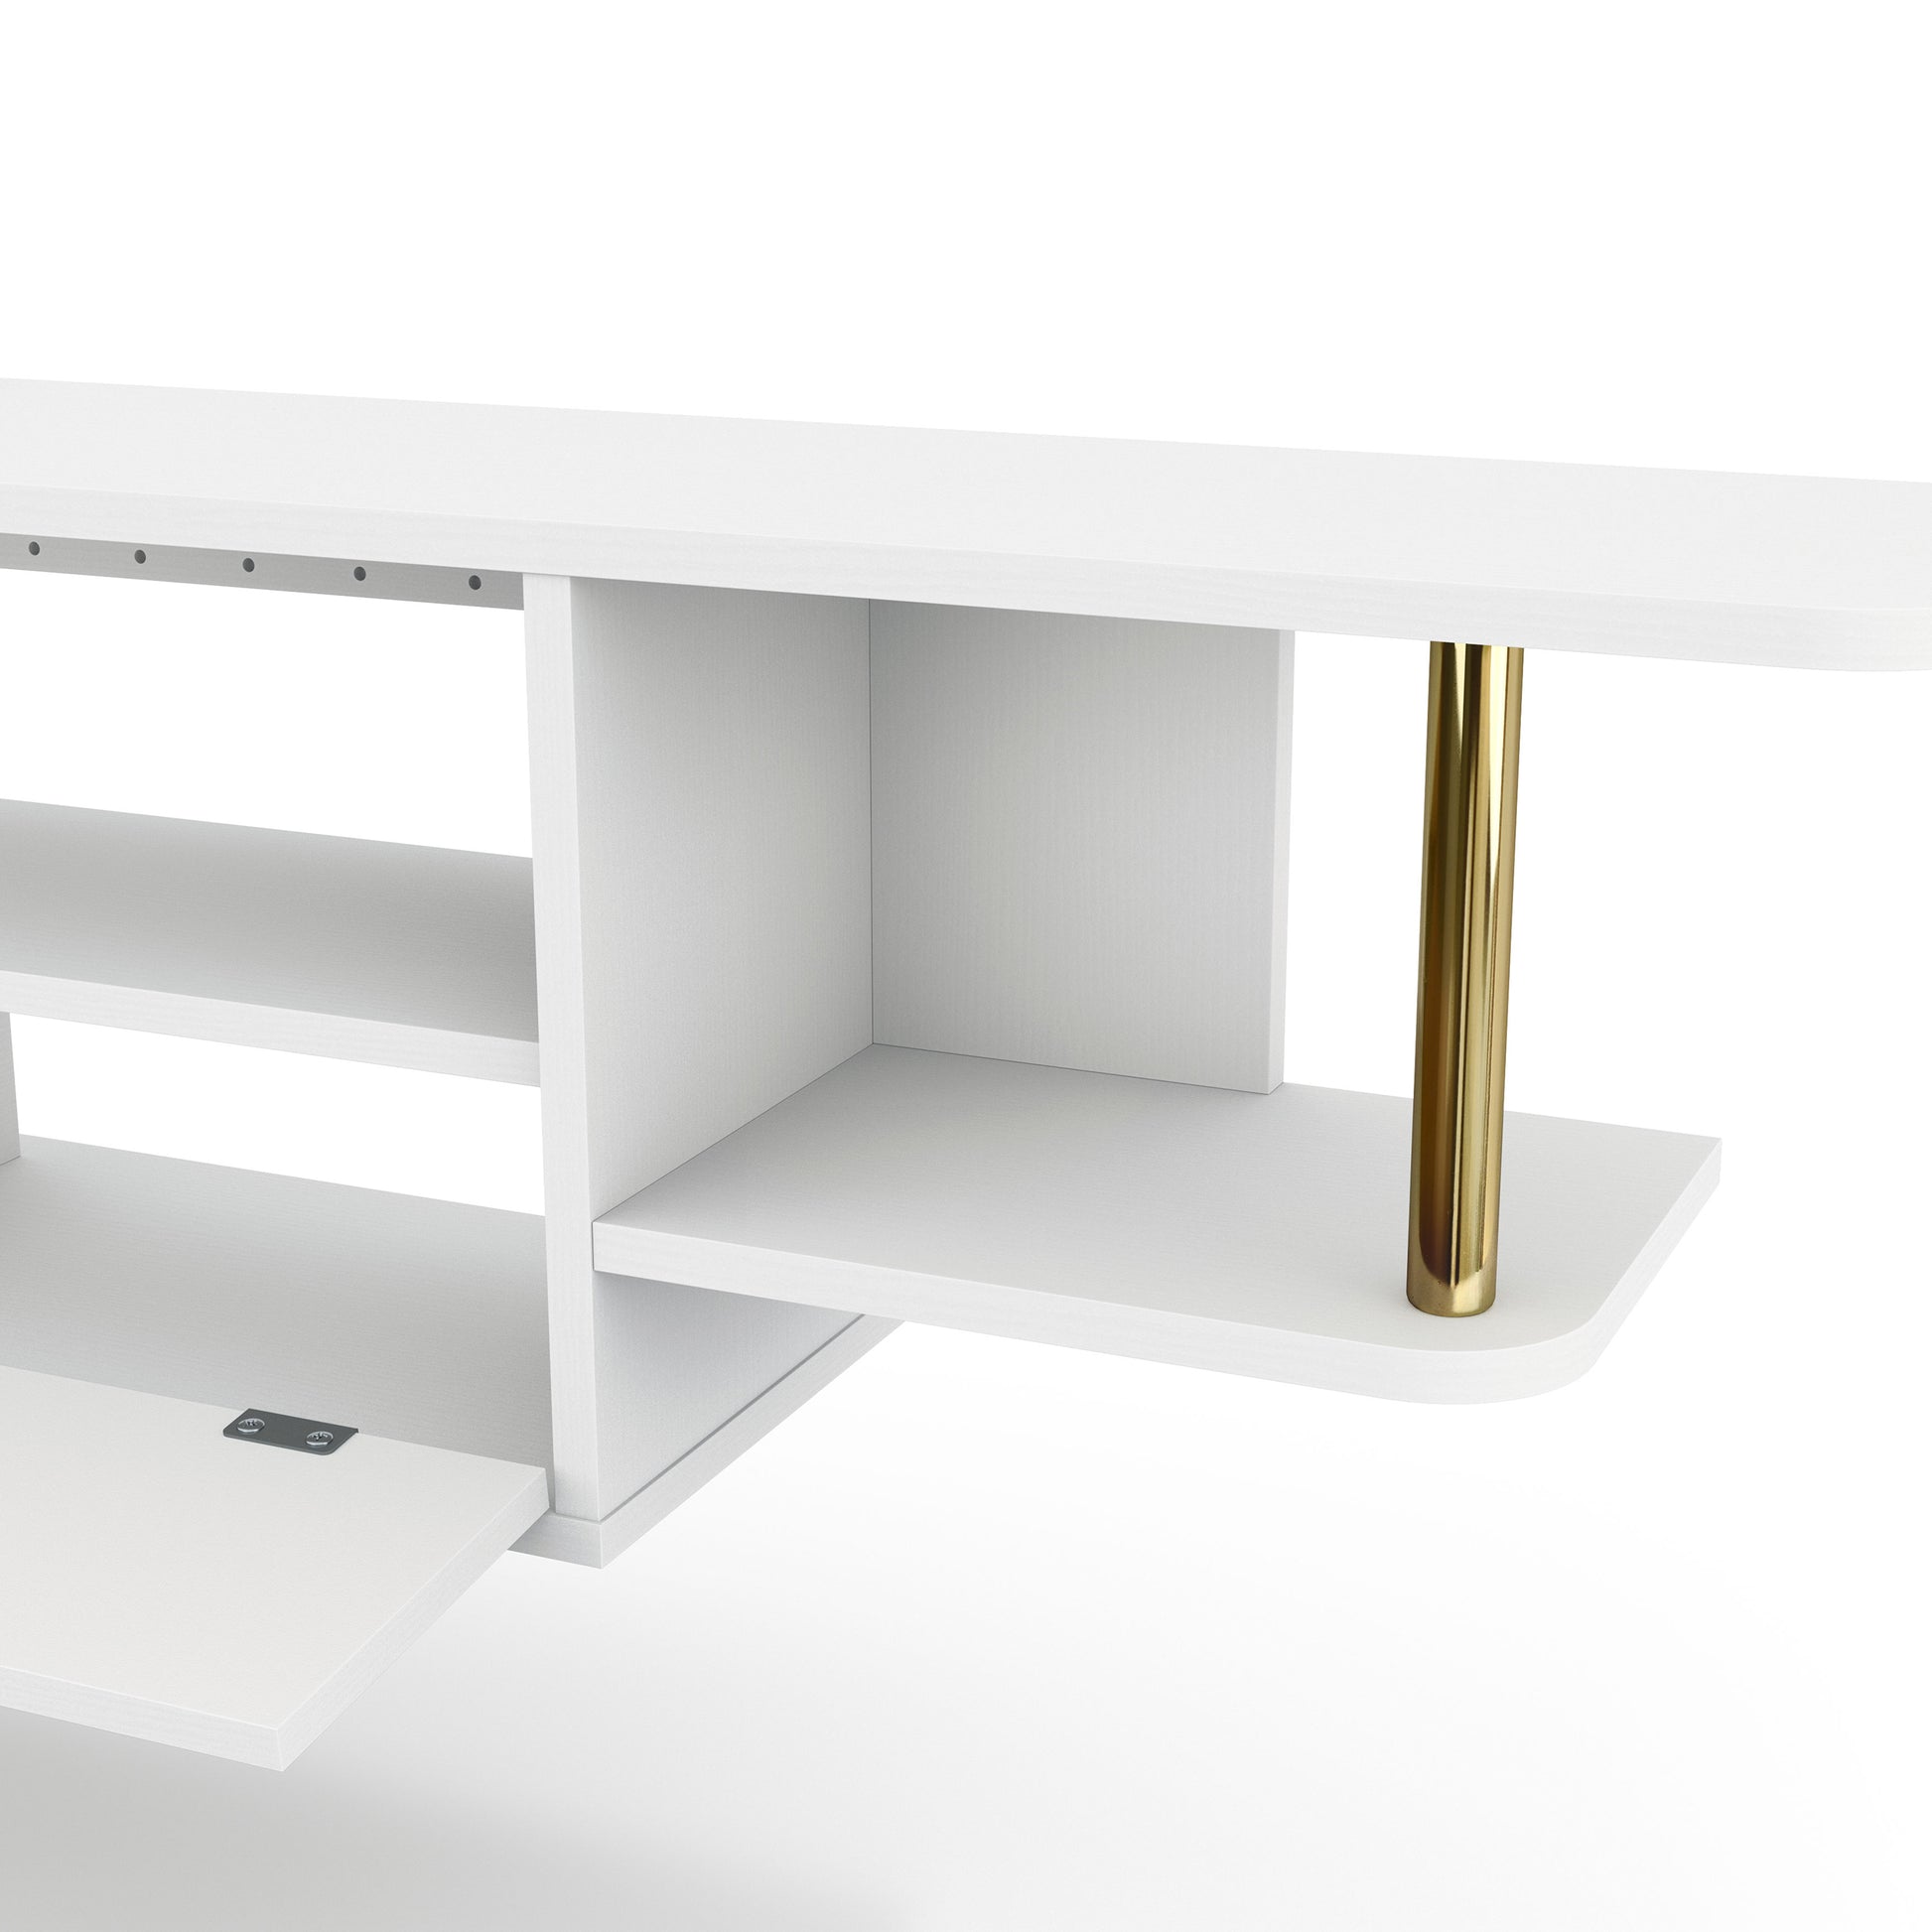 Left angled close-up shelf/metal support view of a modern white and gold three-shelf floating TV stand in a living room with accessories